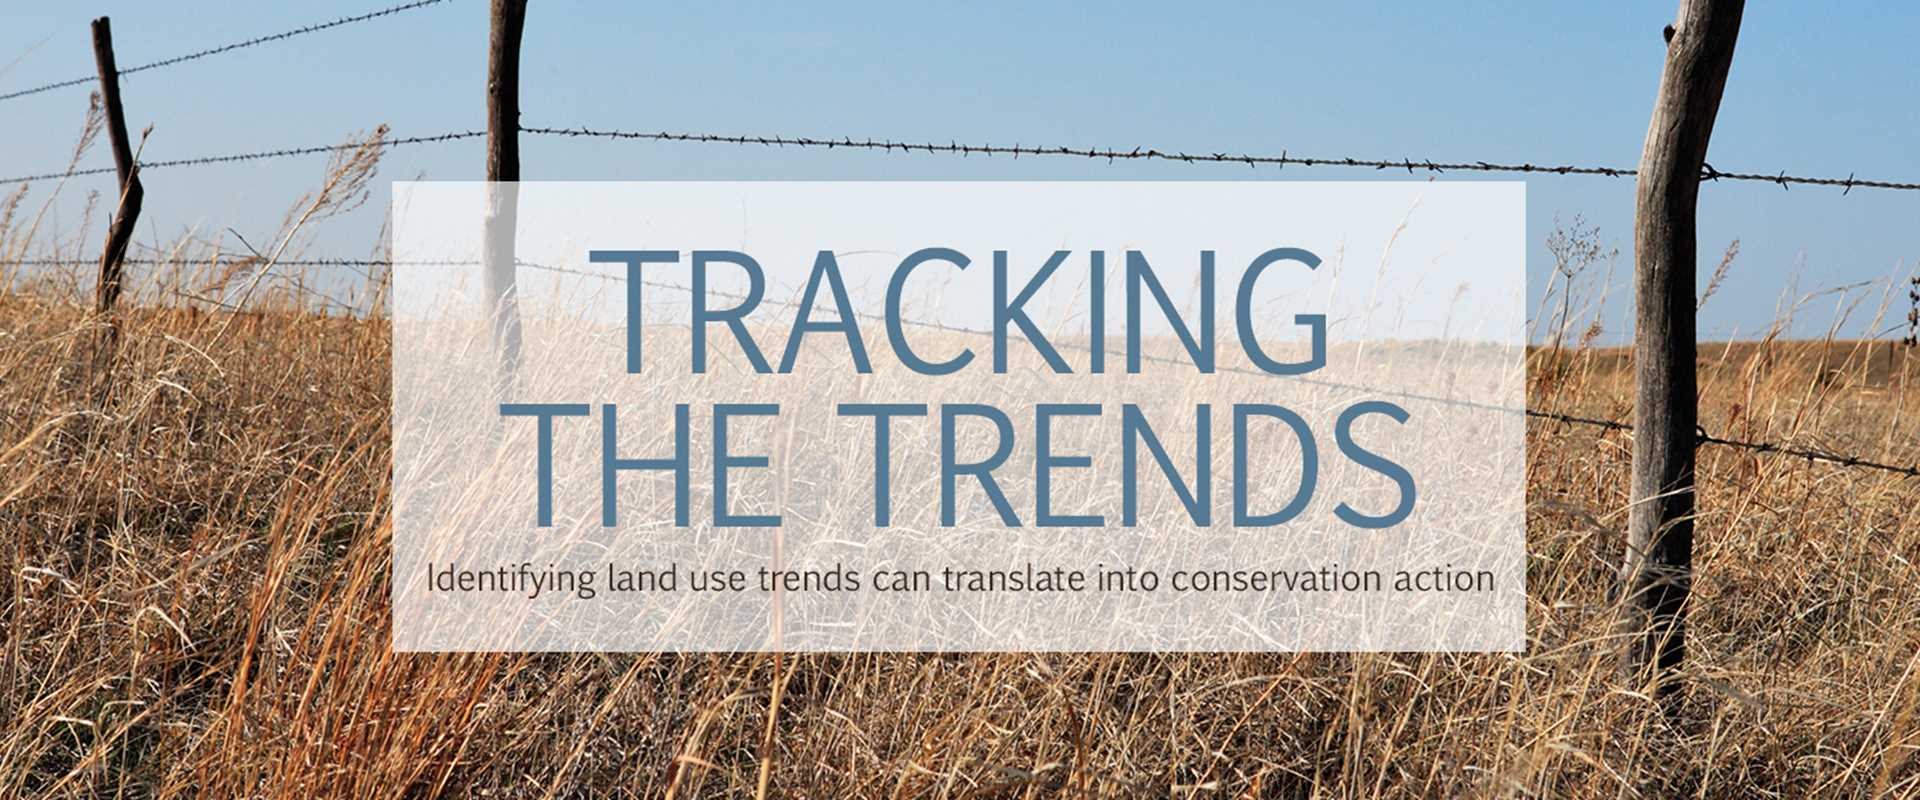 Tracking the trends